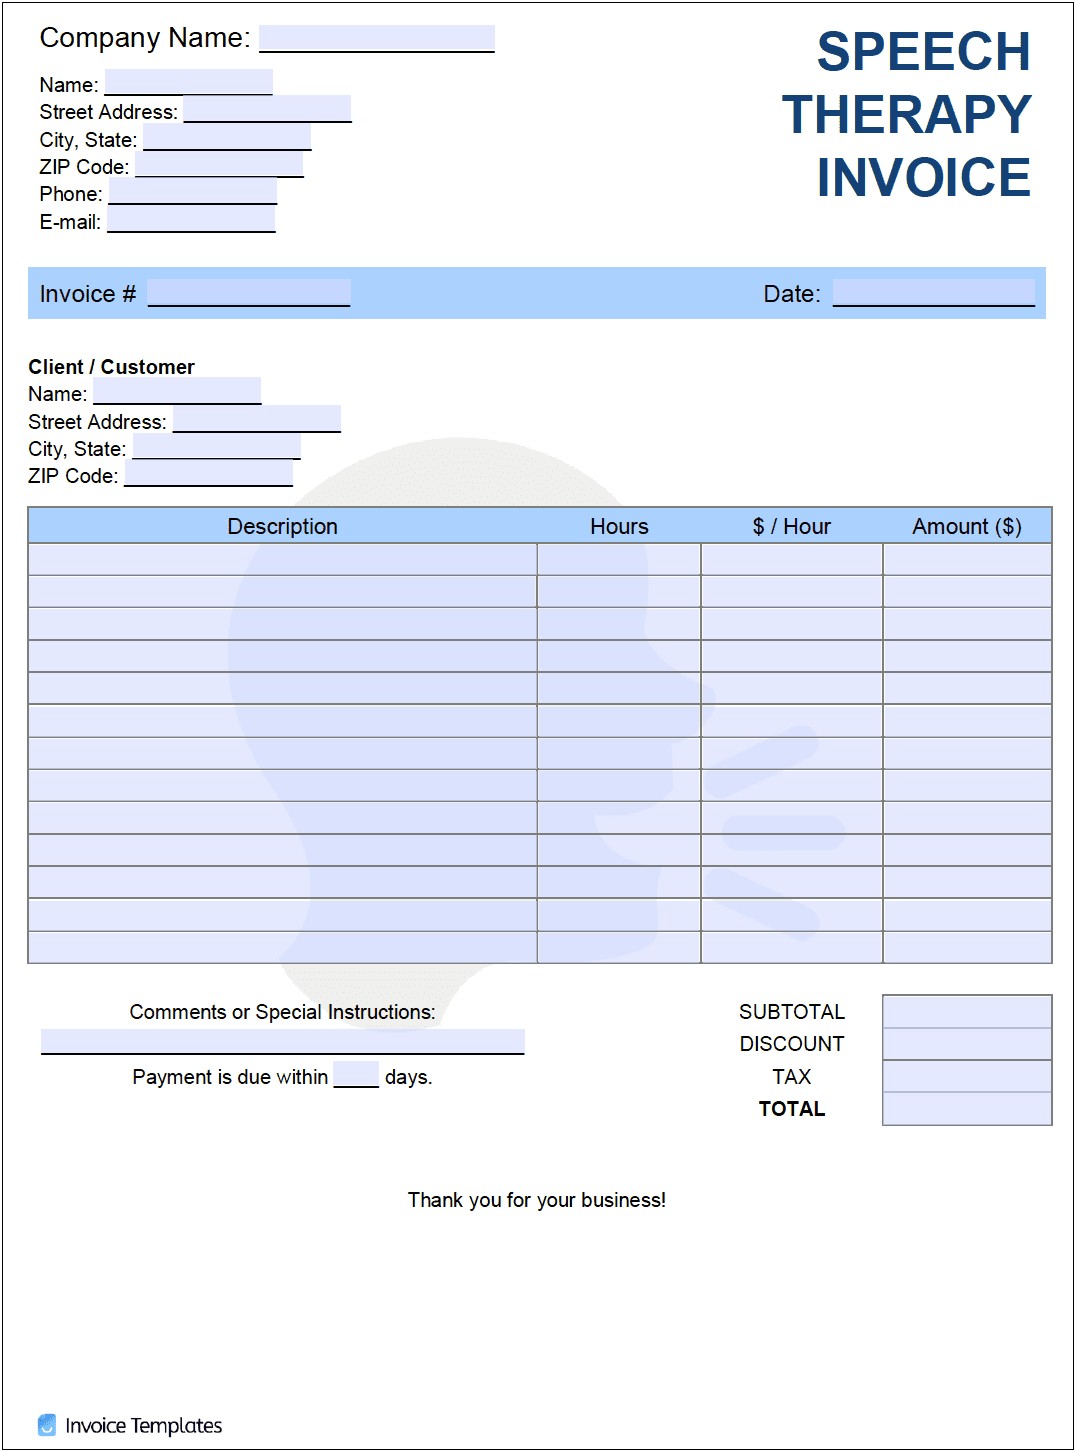 Free Invoice Template For Massage Therapy